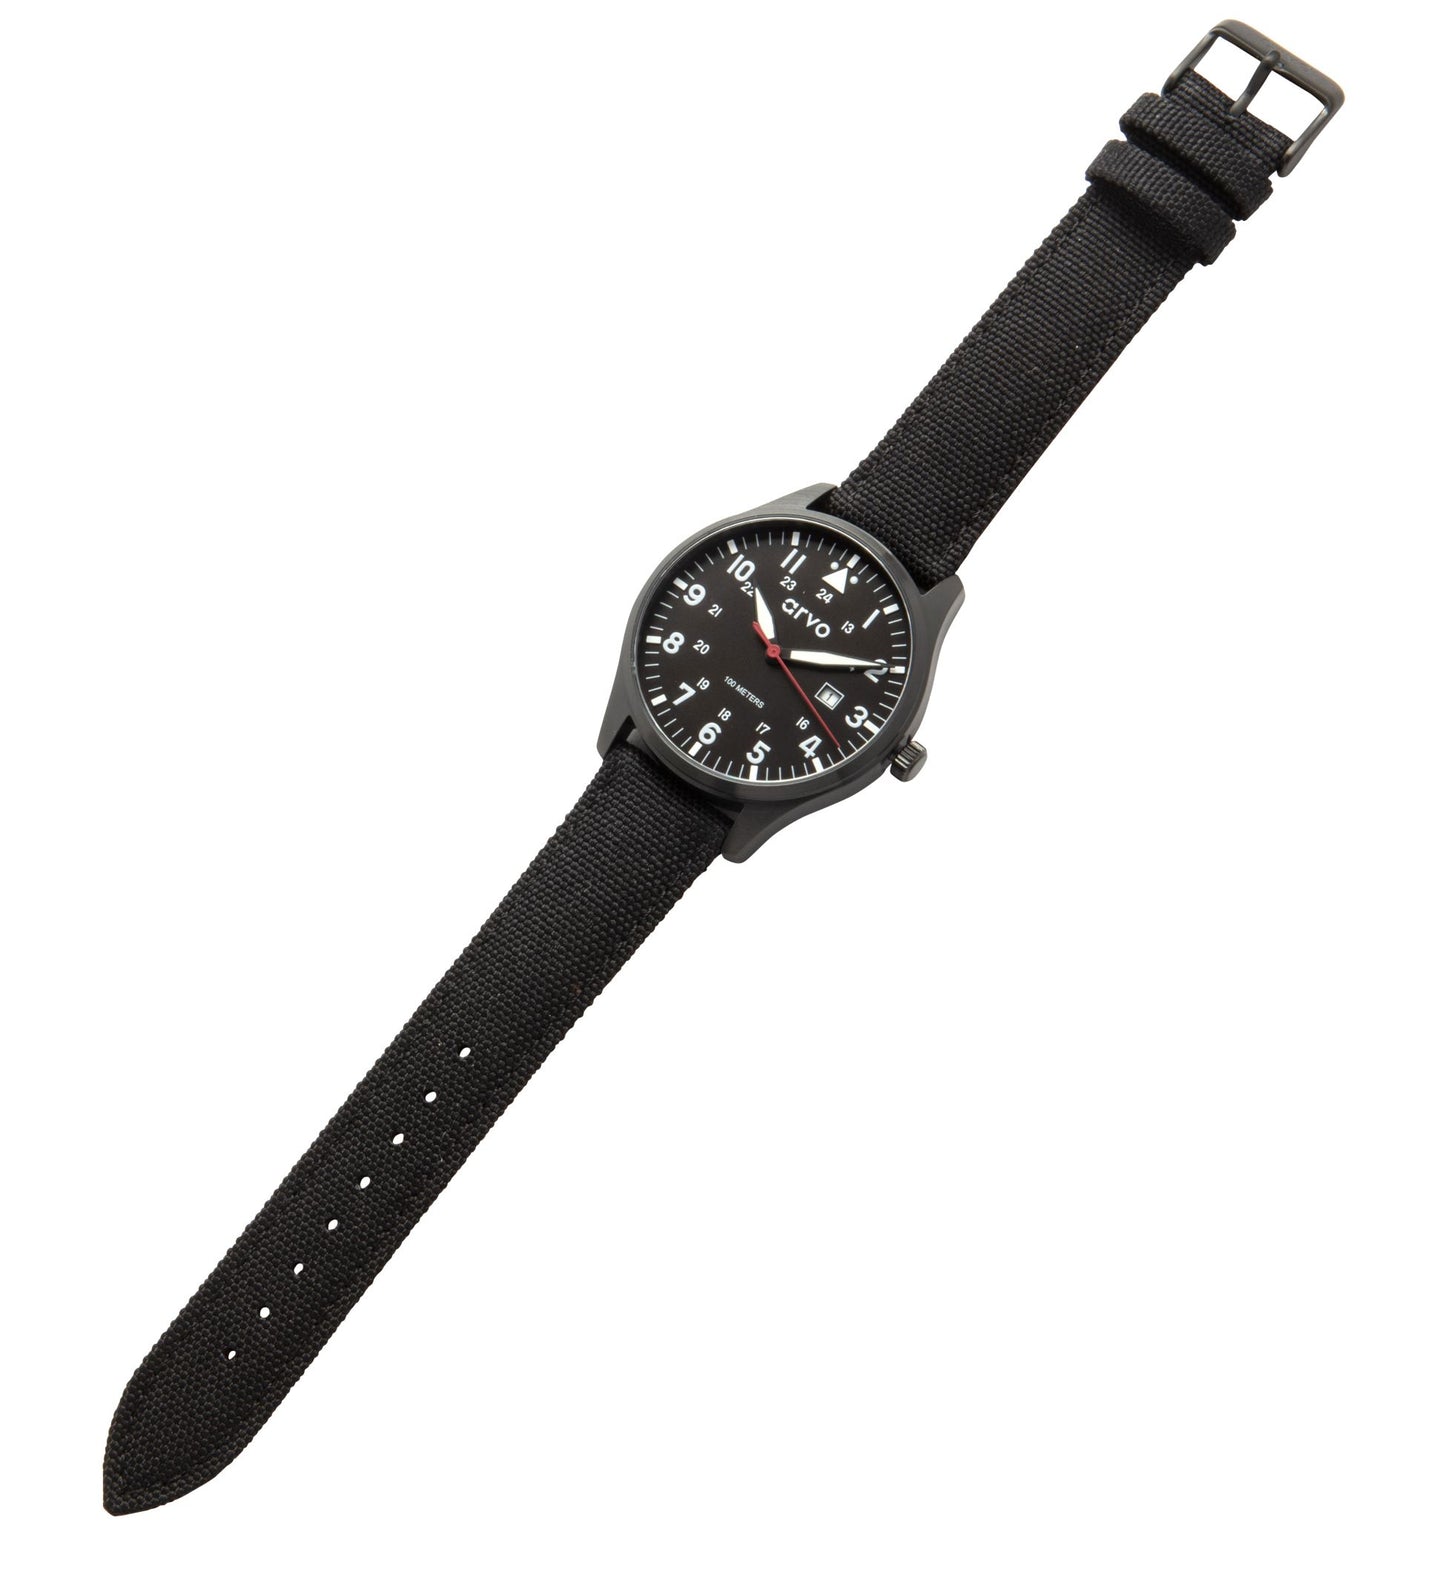 Arvo Rove Field Watch for men with a sky black dial and black canvas strap laying on a white background